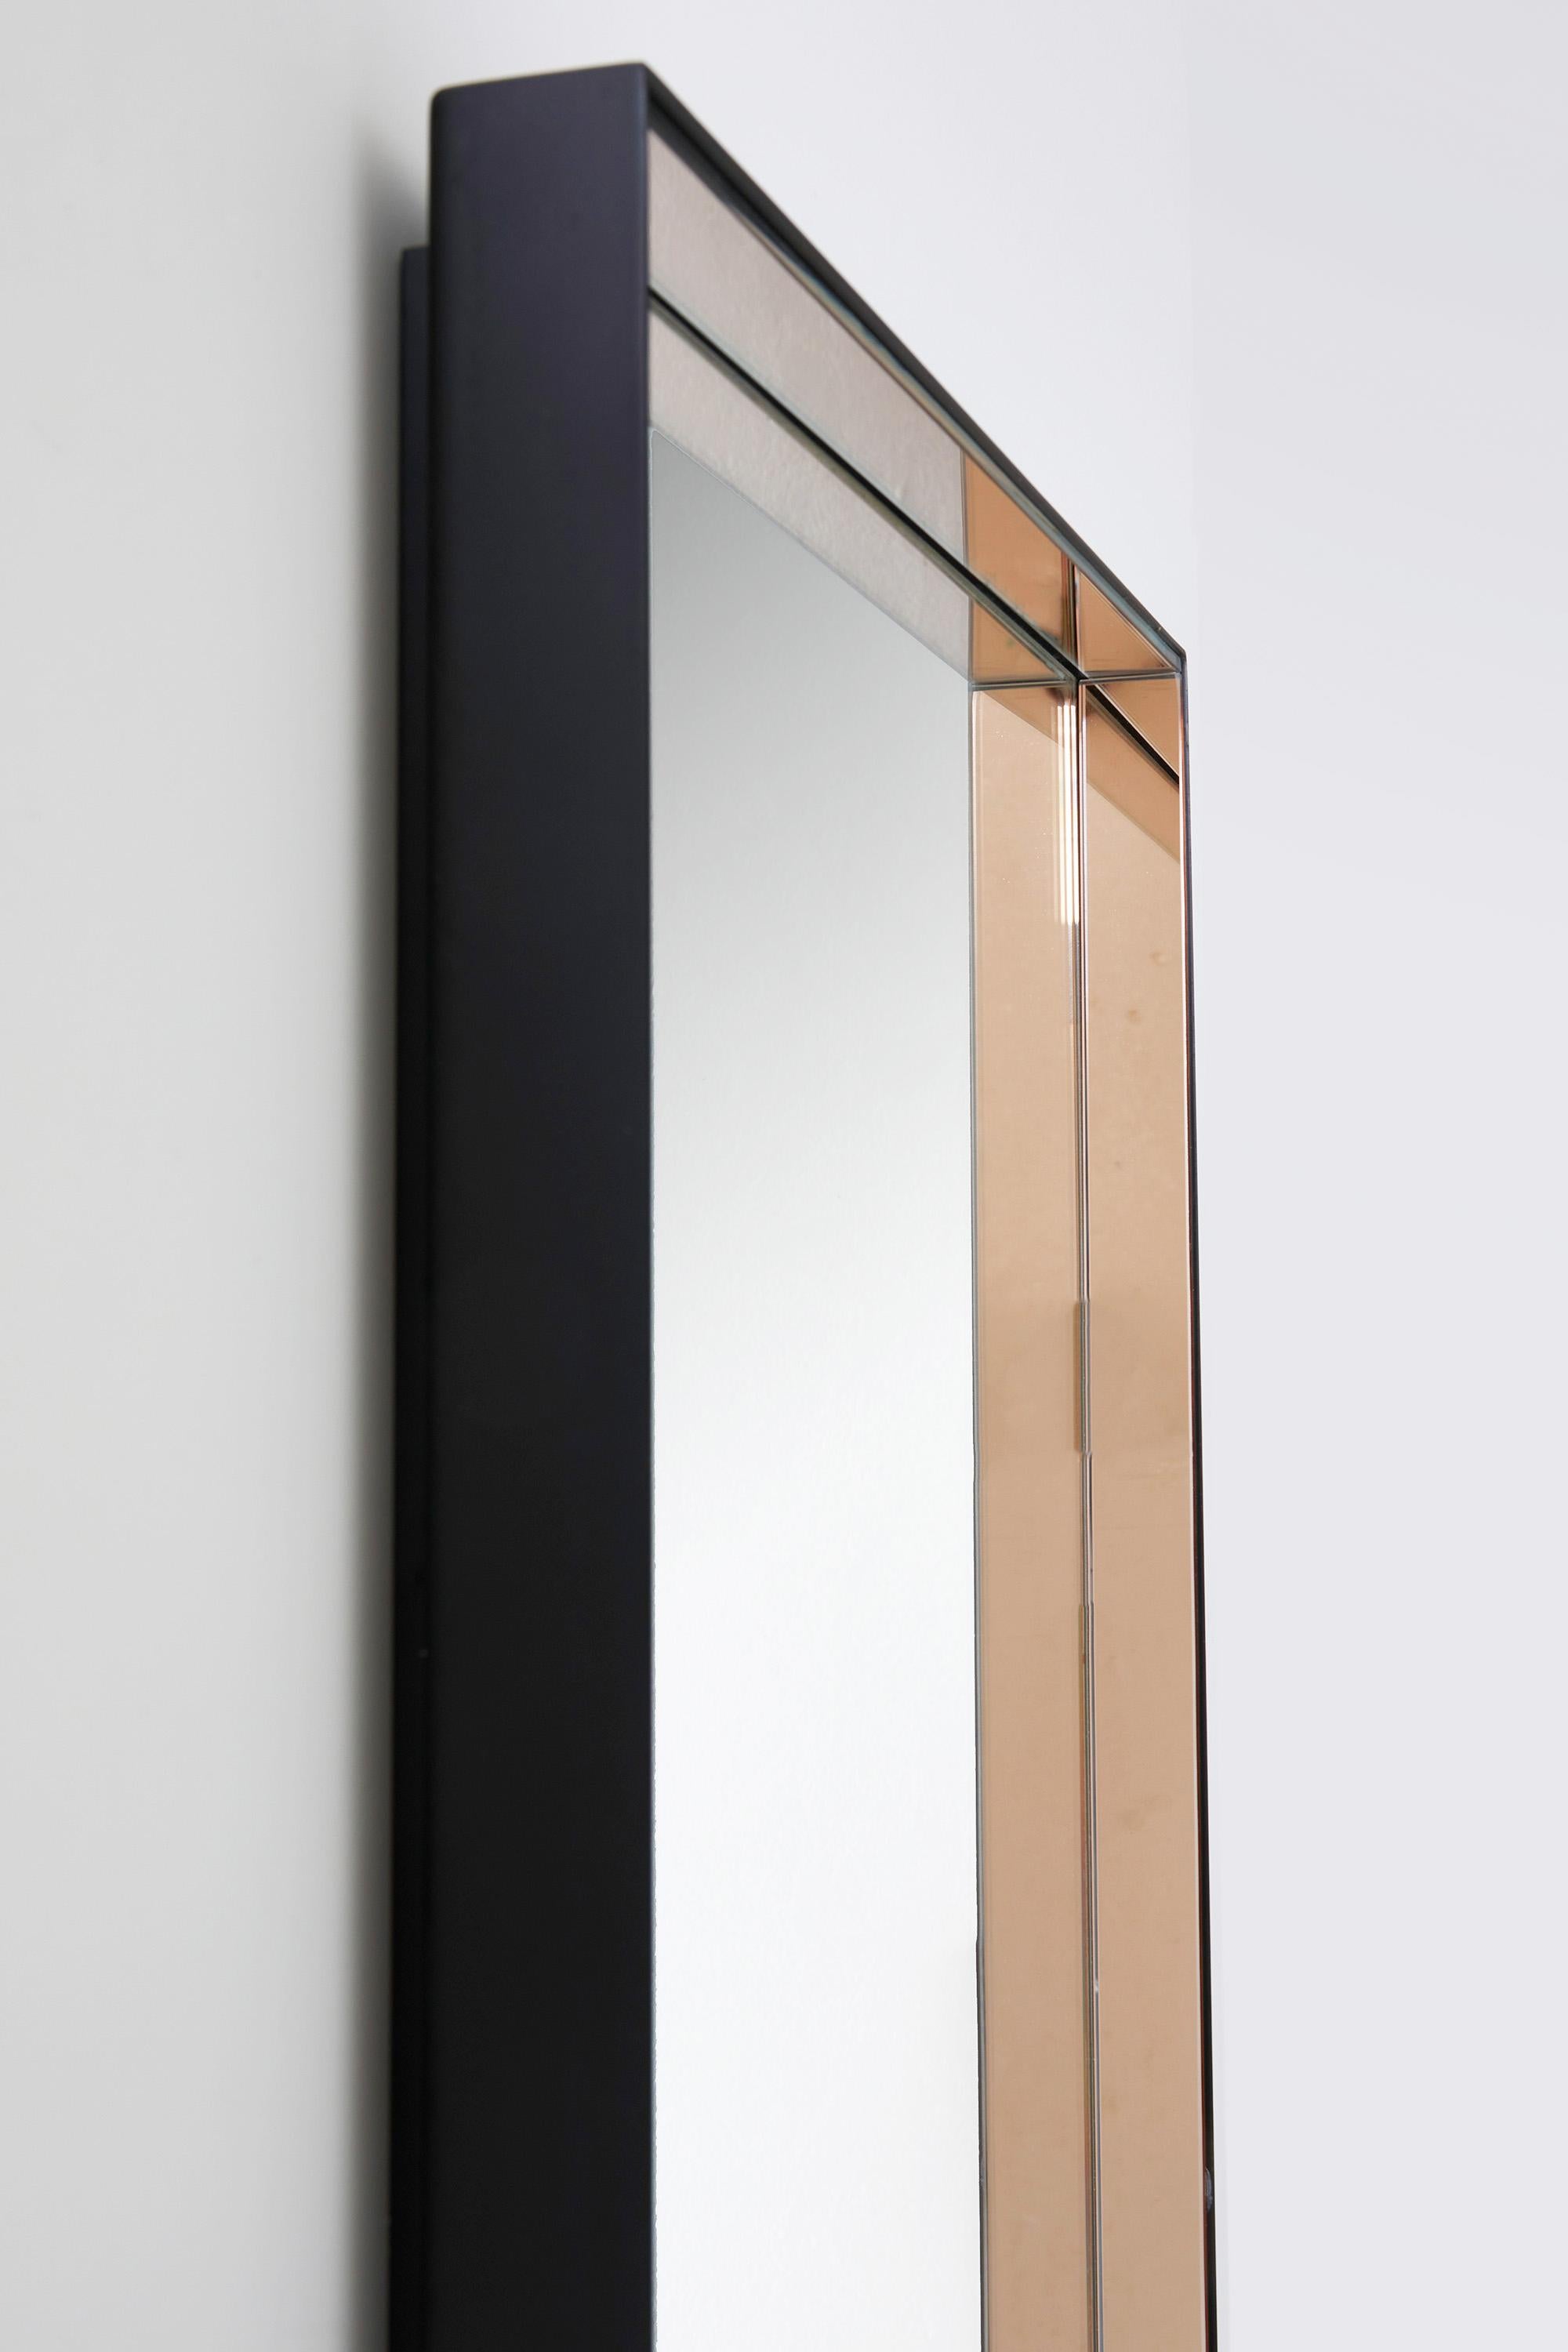 Rectangular mirror model N°1929 by Fontana Arte, Italy 1962

Attributed to Max Ingrand, this elegant wall mirror is composed of a thin black lacquered metal frame which hosts thick strips of colored glass.

This mirror exemplifies the minimalist